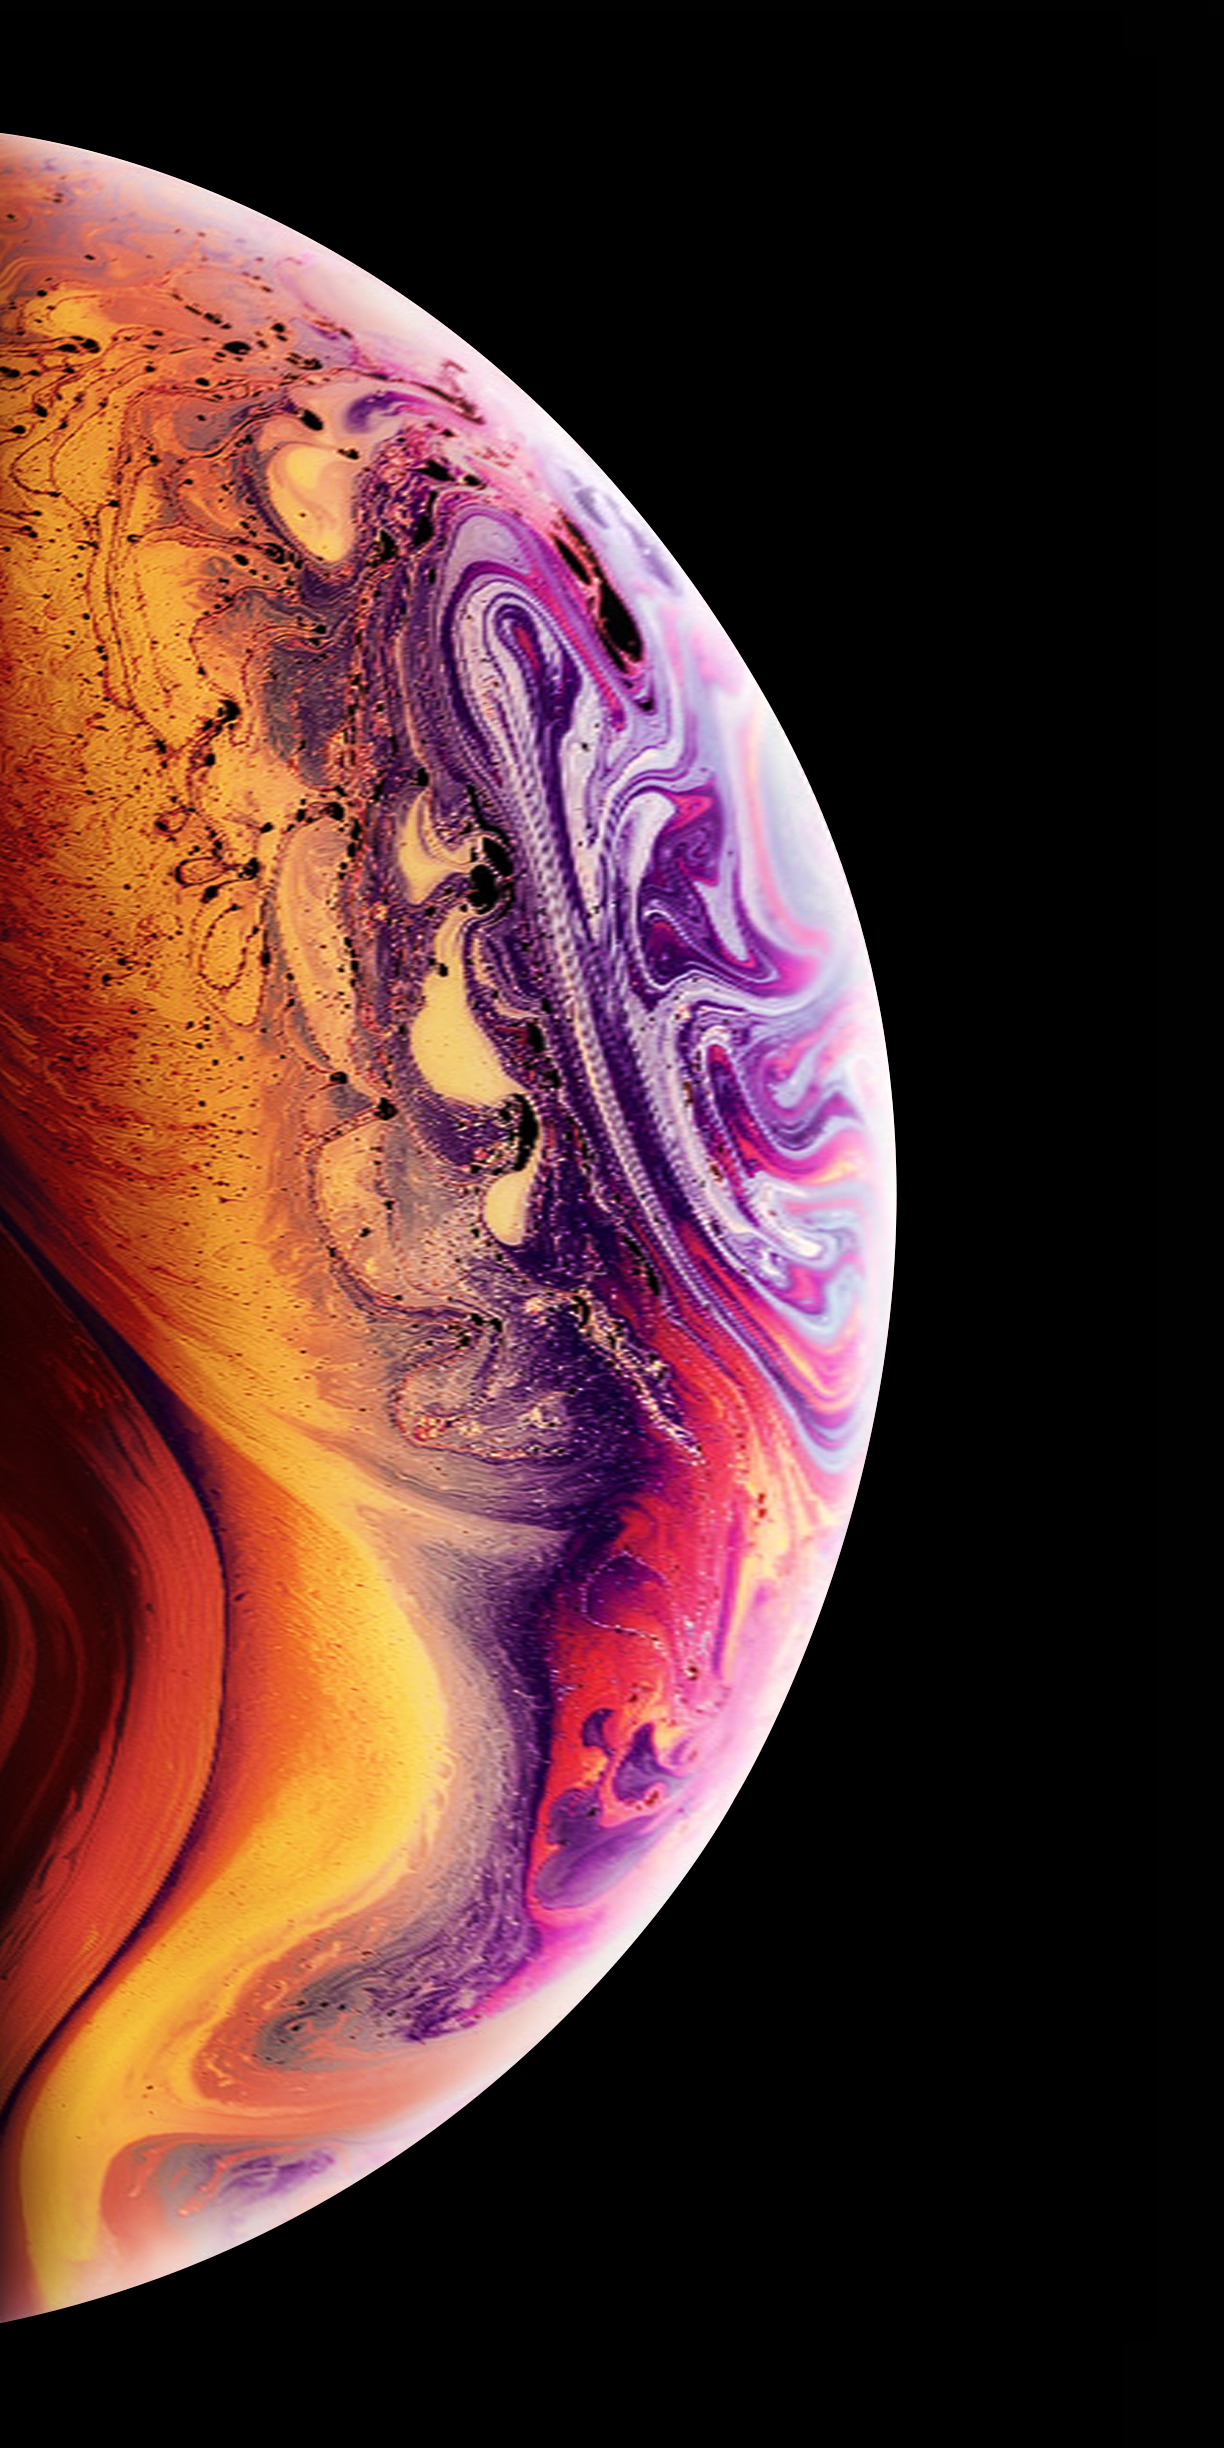 [Download] iPhone XS iPhone XS Max iPhone XR Wallpapers 1224x2448